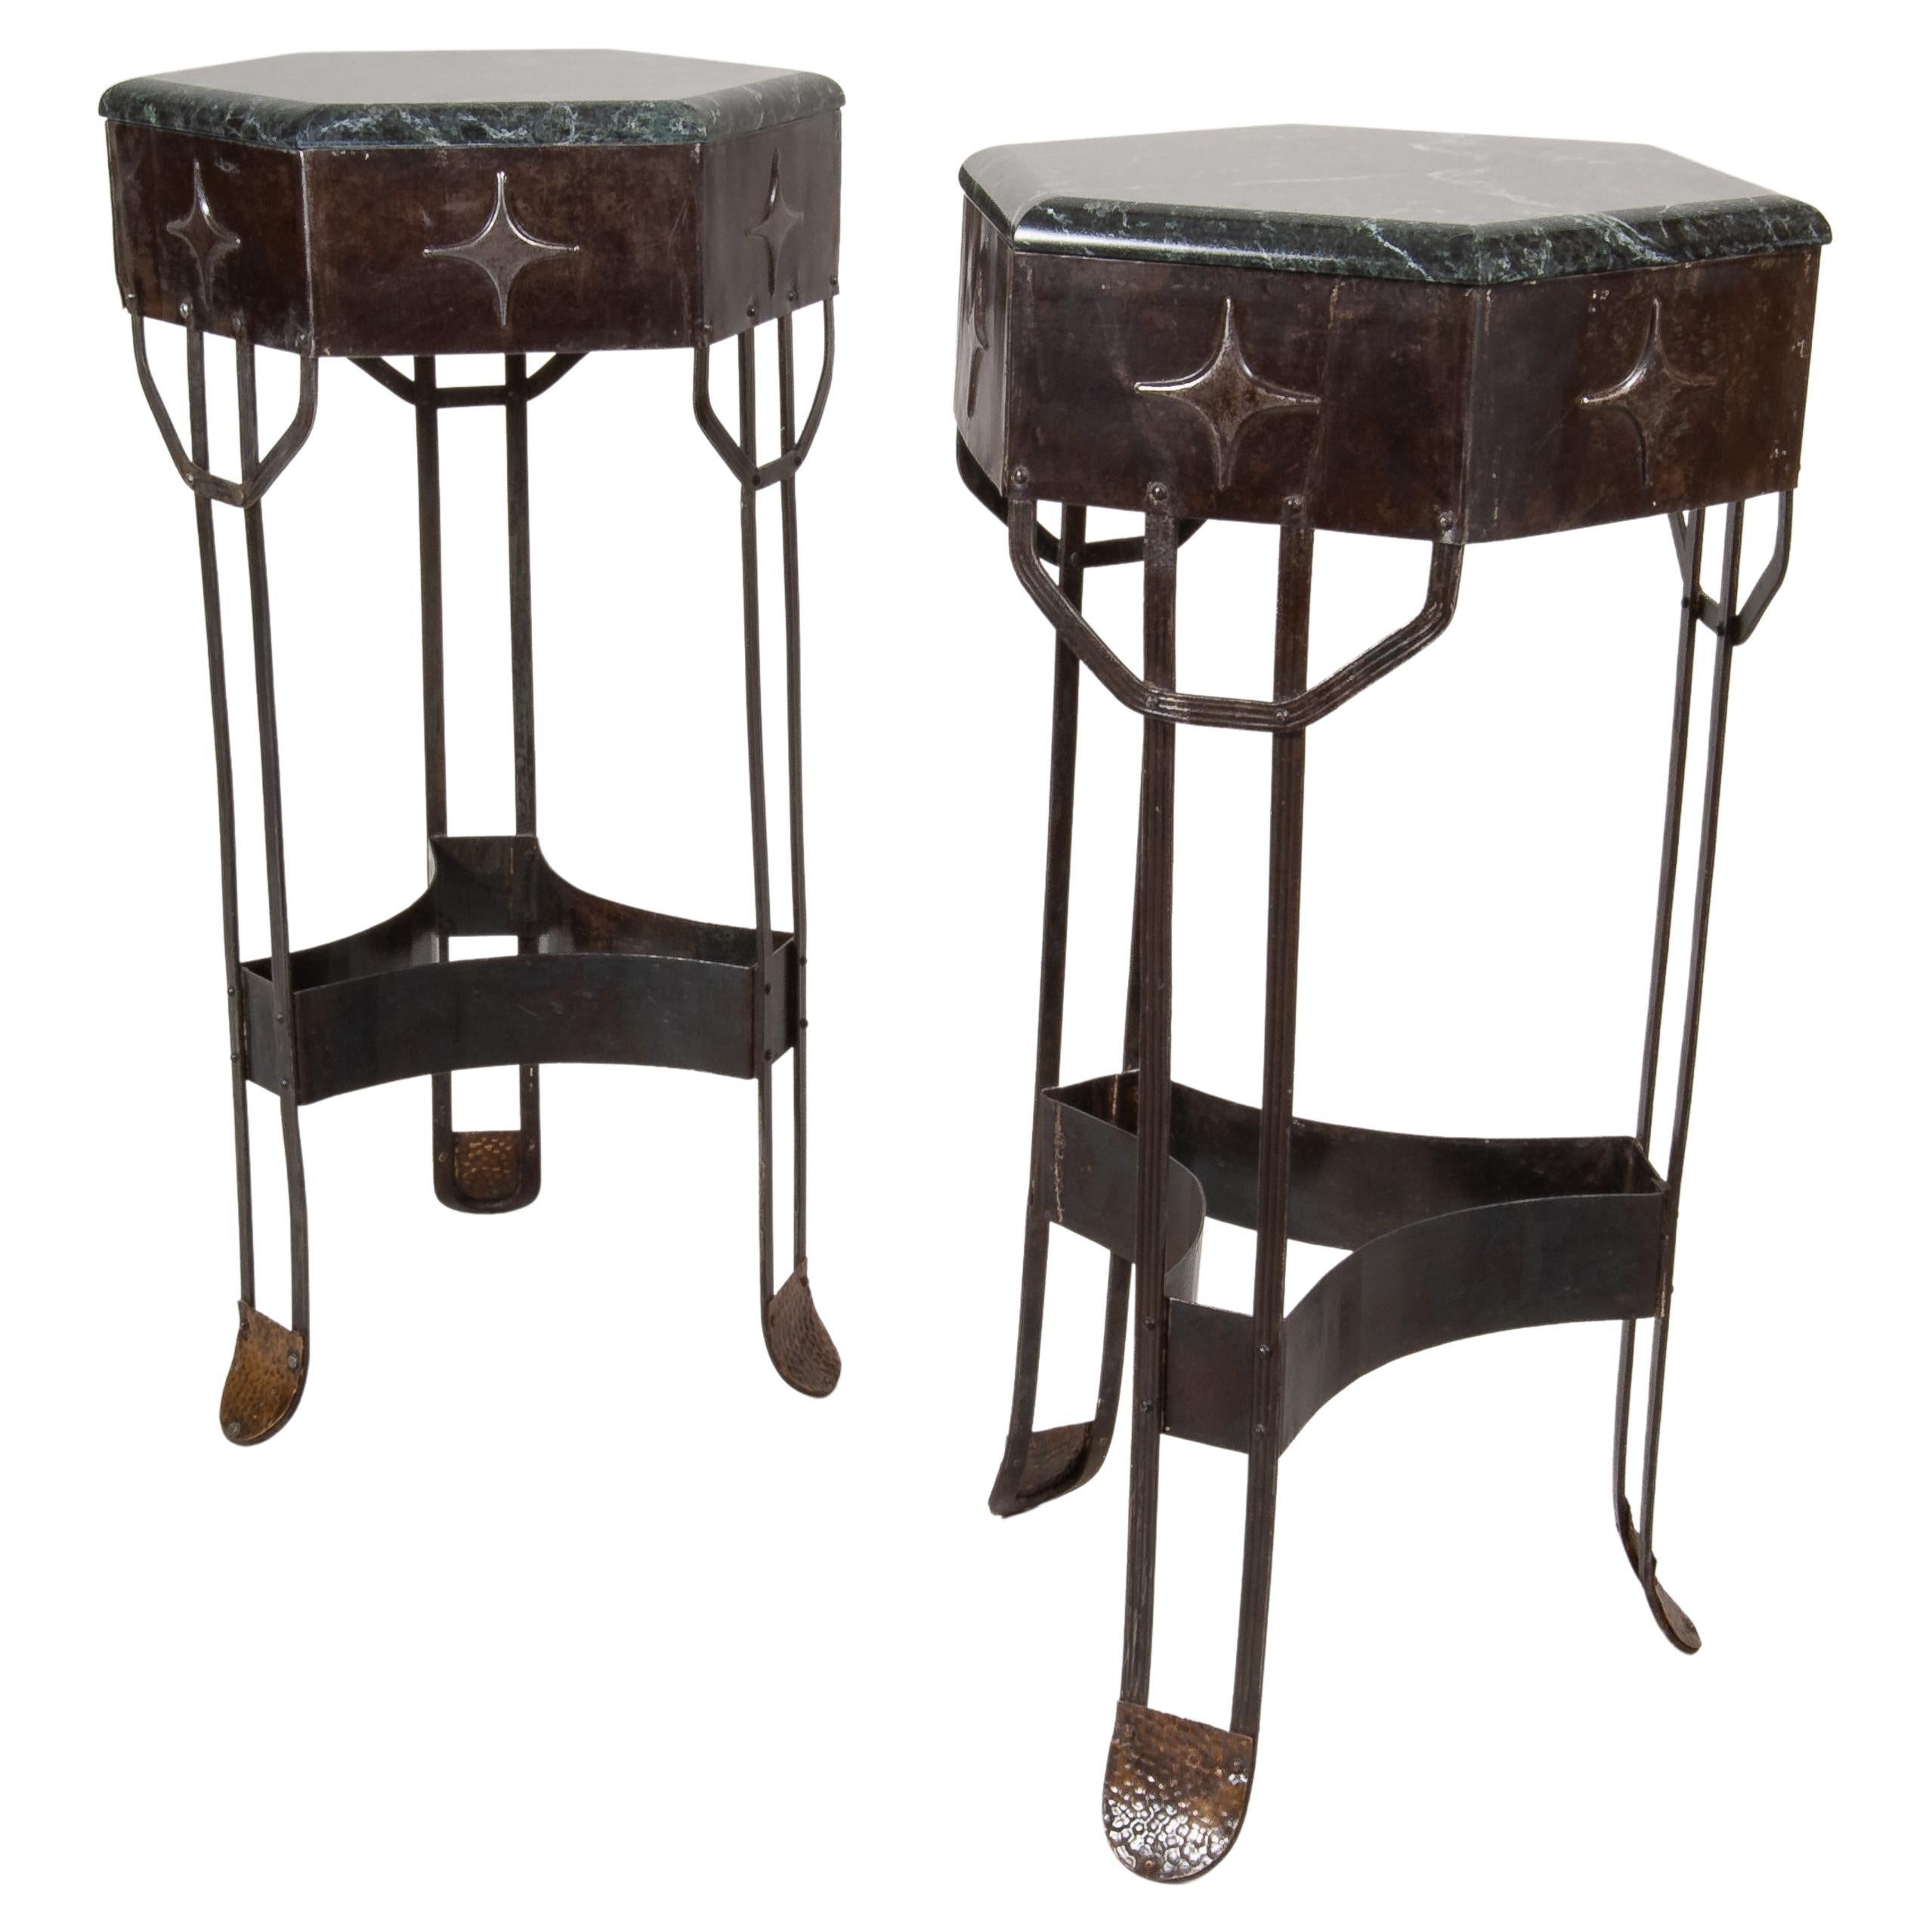 Beautiful Pair of Art Deco Wrought Iron Pedestals with Green/Black Marble Top For Sale